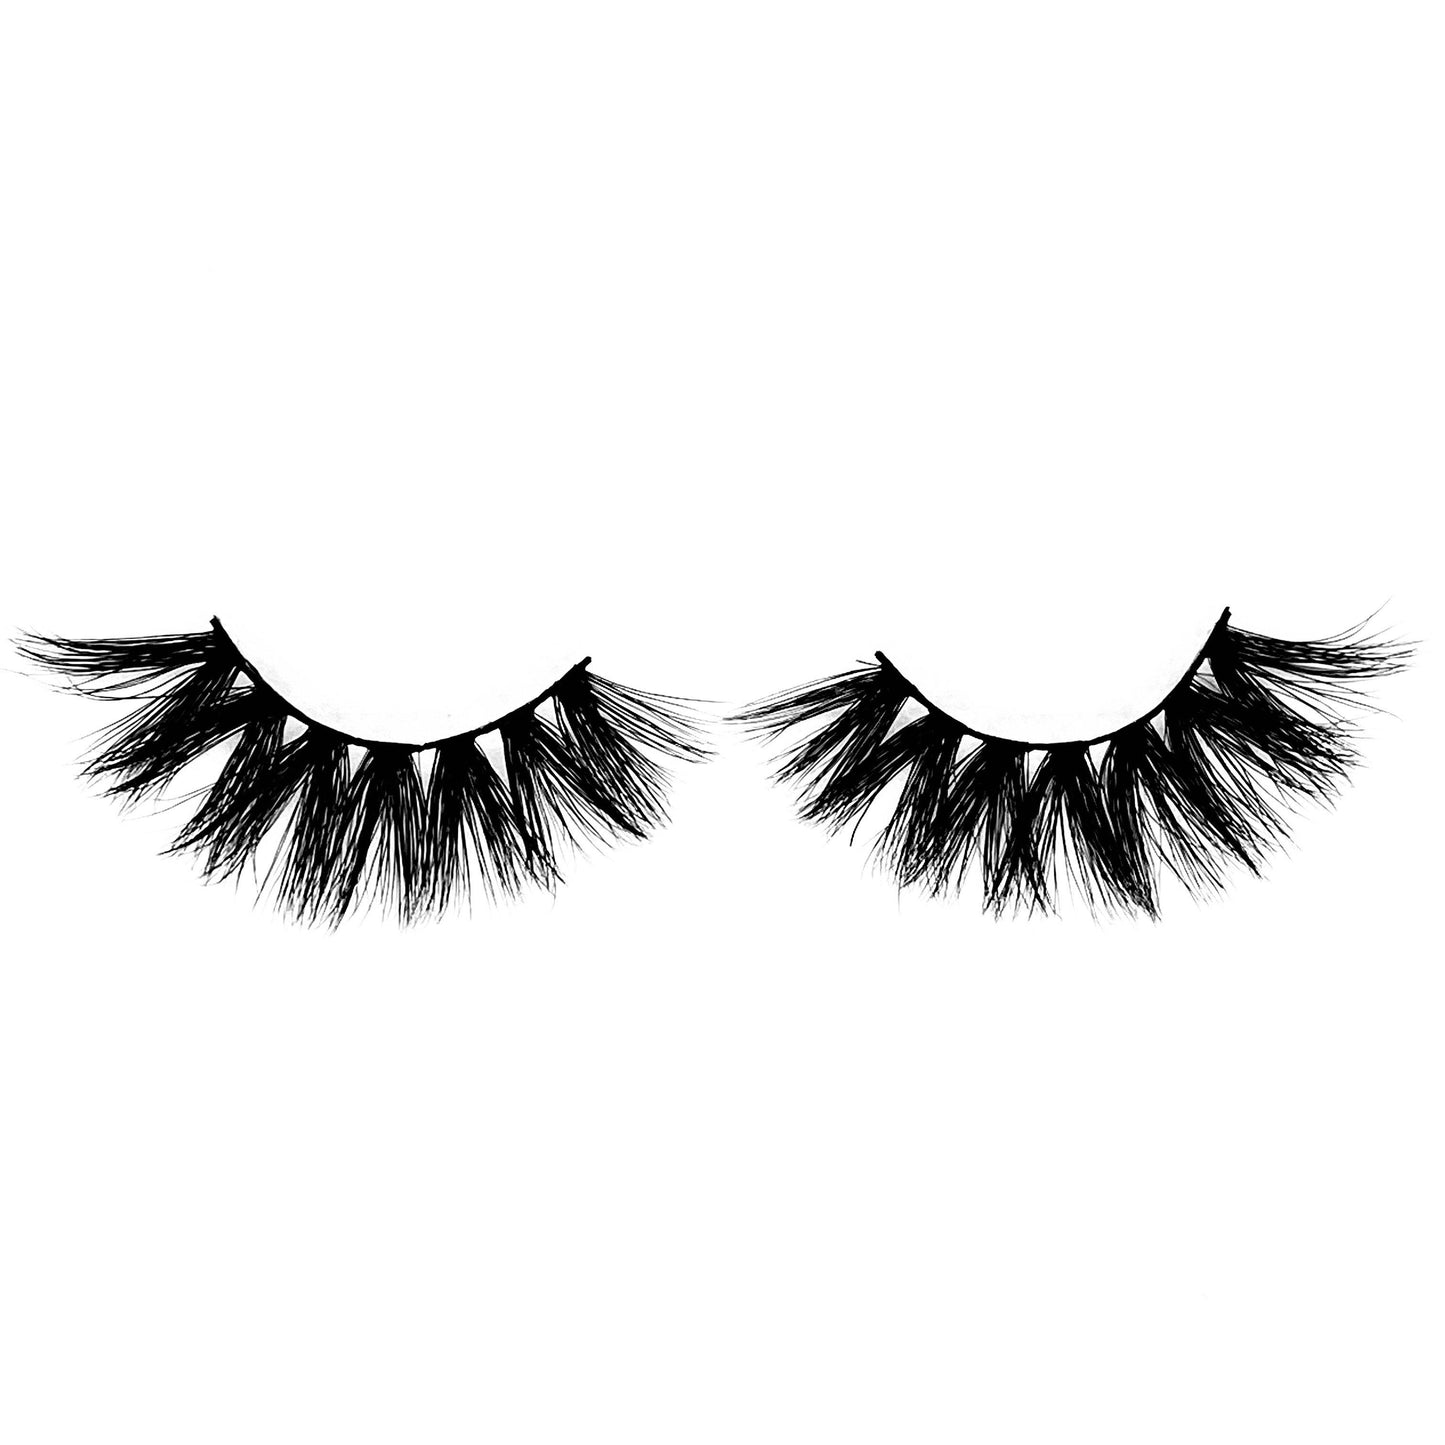 Indespoiled-High Volume-"Indespoiled" is the combination of independent and spoiled. These lashes are inspired by our ladies that get their own bag, but love to be spoiled too! Our "Indespoiled" lashes are everything and then some. The unique design of these lashes makes them super cute and fun to wear. Also available in our "Boss Up (3-Pack)." Try our 25mm "Babydoll" lashes for a longer look! Description Handmade, Cruelty-Free, Wear up to 30x Material: 100% Mink Band: Thin, Black Cotton Band Vo